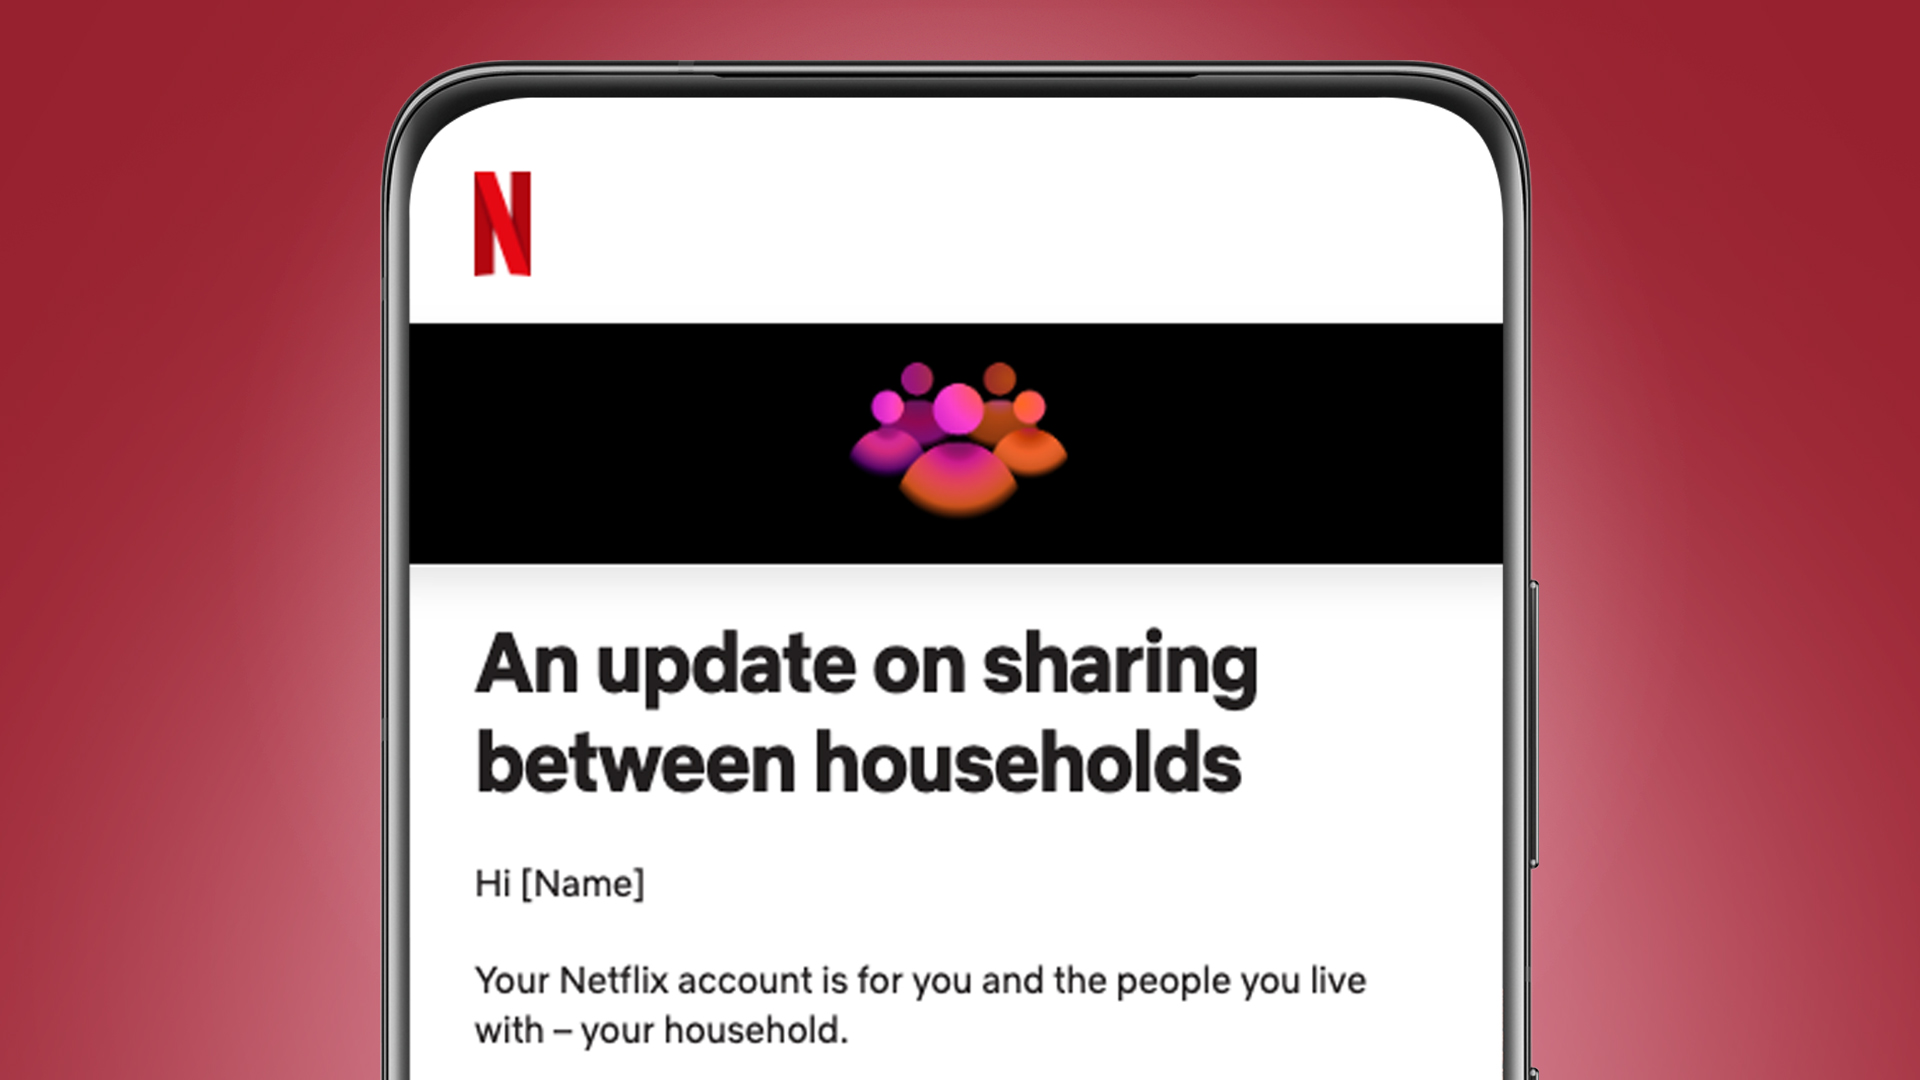 Netflix Password Update: You Need to Pay for Extra Members